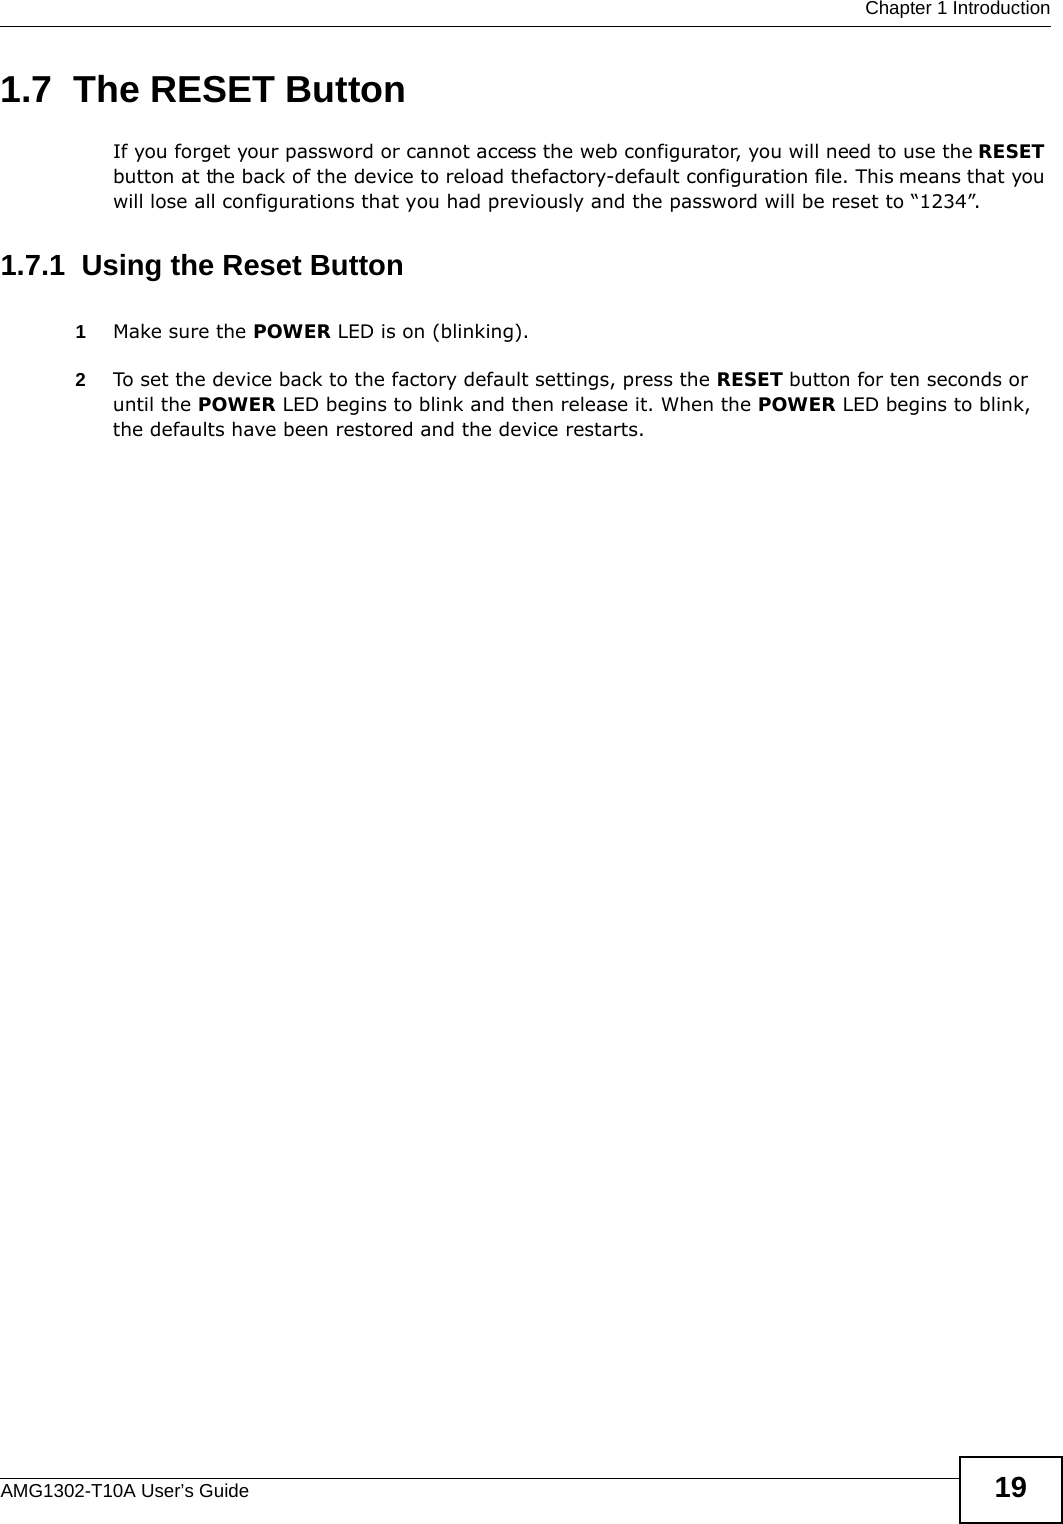  Chapter 1 IntroductionAMG1302-T10A User’s Guide 191.7  The RESET ButtonIf you forget your password or cannot access the web configurator, you will need to use the RESET button at the back of the device to reload the factory-default configuration file. This means that you will lose all configurations that you had previously and the password will be reset to “1234”. 1.7.1  Using the Reset Button1Make sure the POWER LED is on (blinking).2To set the device back to the factory default settings, press the RESET button for ten seconds or until the POWER LED begins to blink and then release it. When the POWER LED begins to blink, the defaults have been restored and the device restarts.